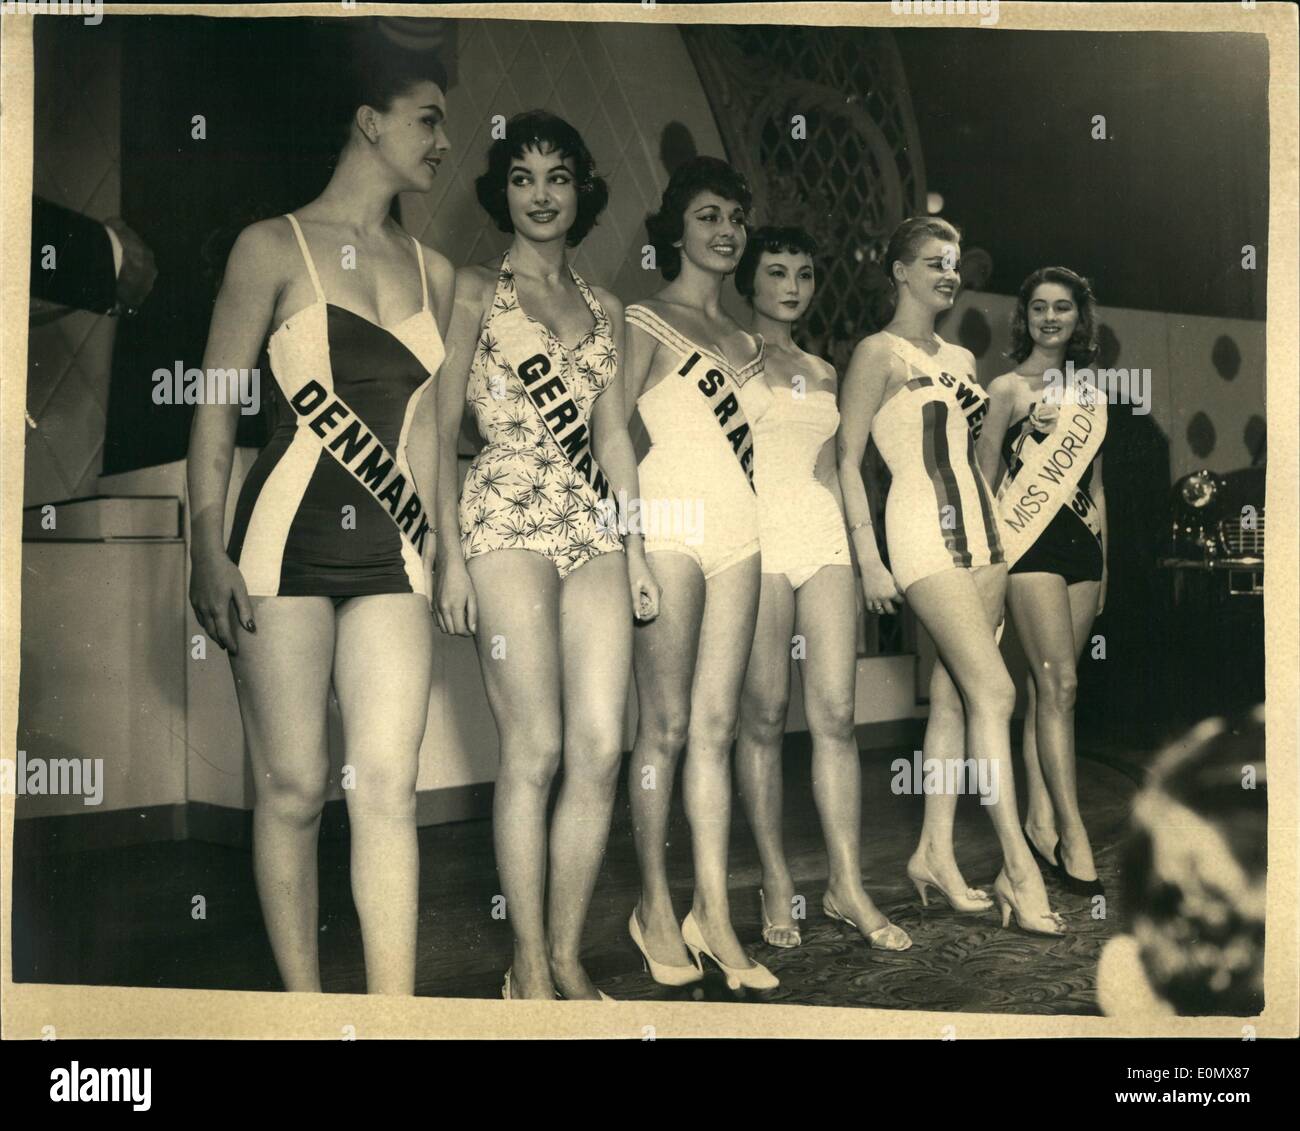 Oct. 10, 1956 - Miss Germany is elected ''Miss World'' But Miss U.S.A Appears wearing the Sash In Error: Photo shows Miss Germany was chosen ''Miss World'' from these six finalist but Miss U.S.A. (extreme right) appeared wearing the titled sash of ''Miss World 1956'' in whose error? Stock Photo